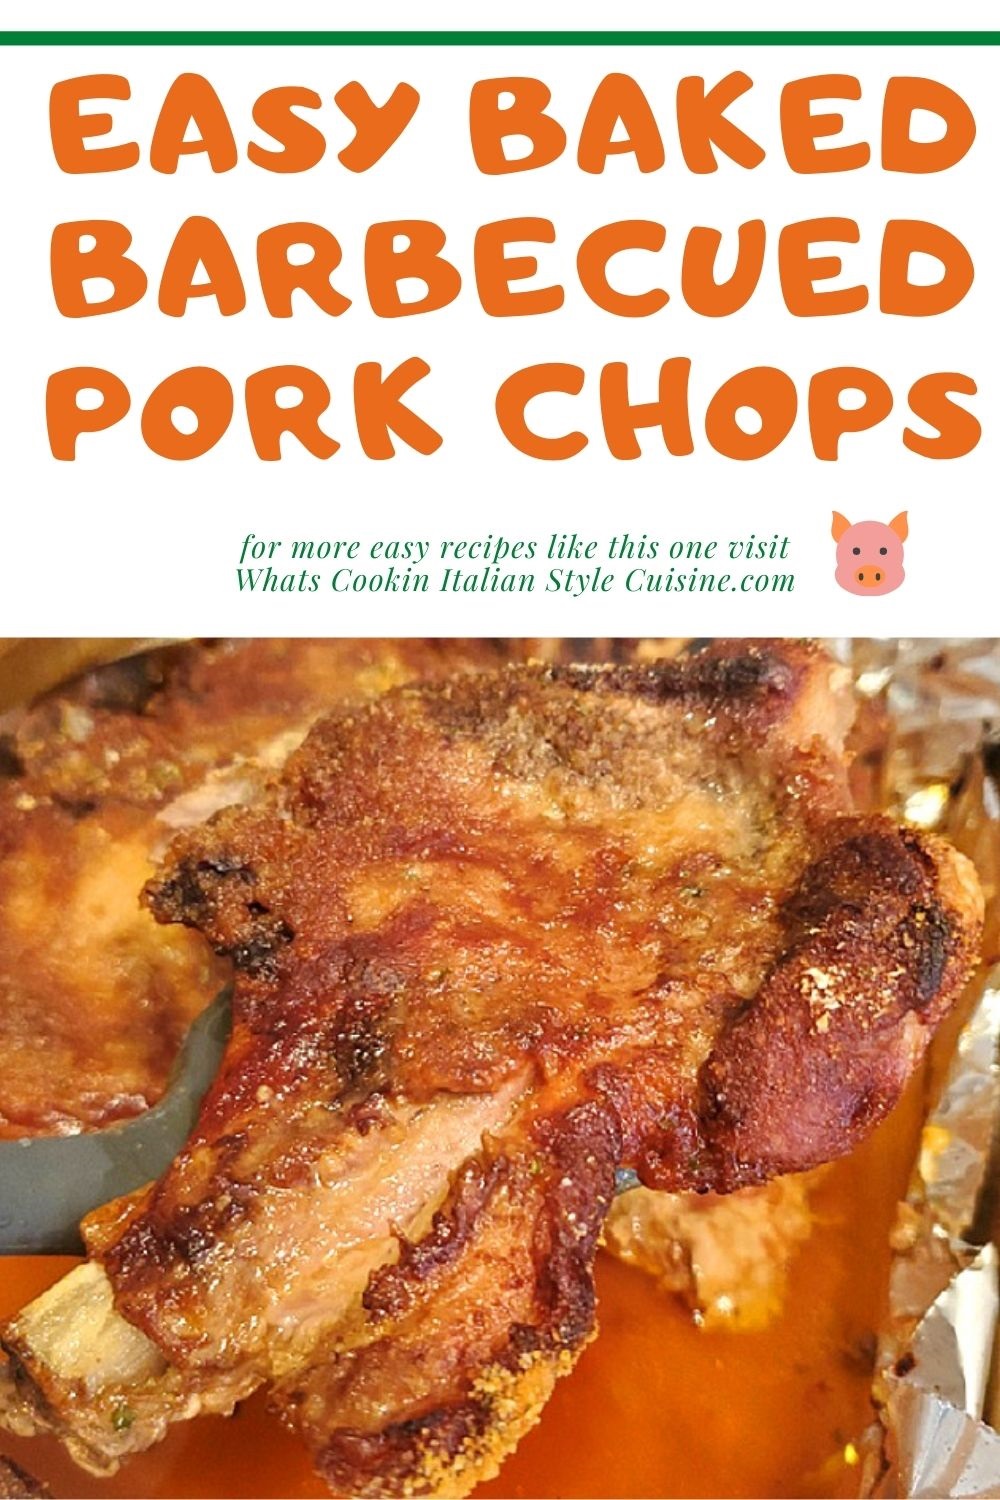 Easy Baked Barbecued Pork Chops | What's Cookin' Italian Style Cuisine